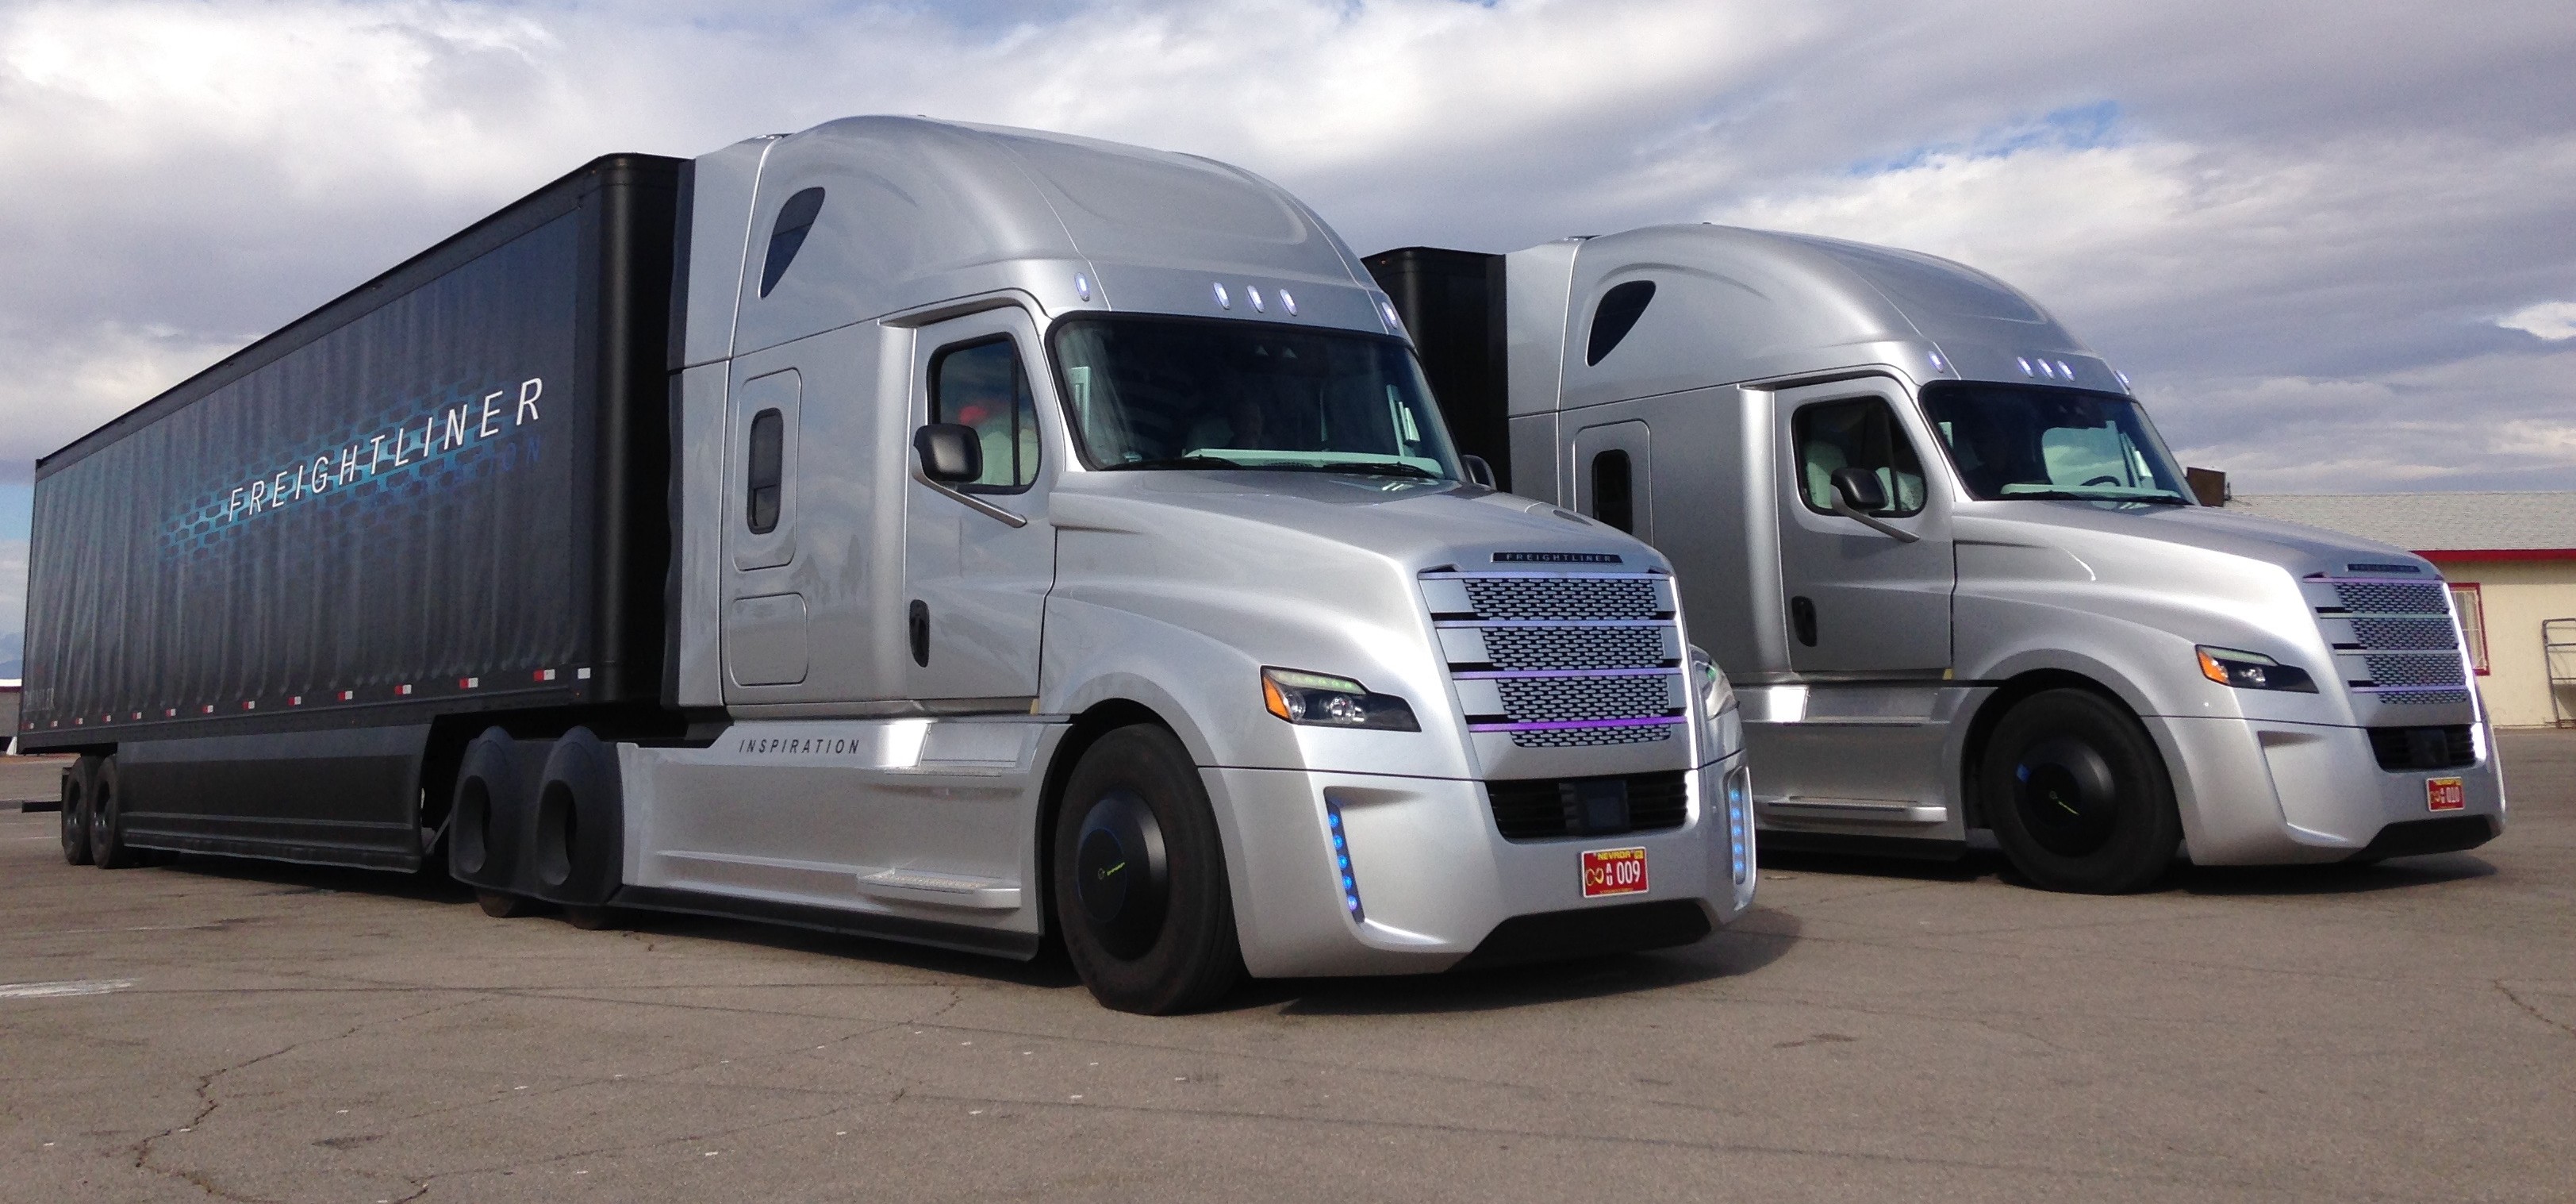 Highly Automated Commercial Vehicle Webcast April 24 Atlanta